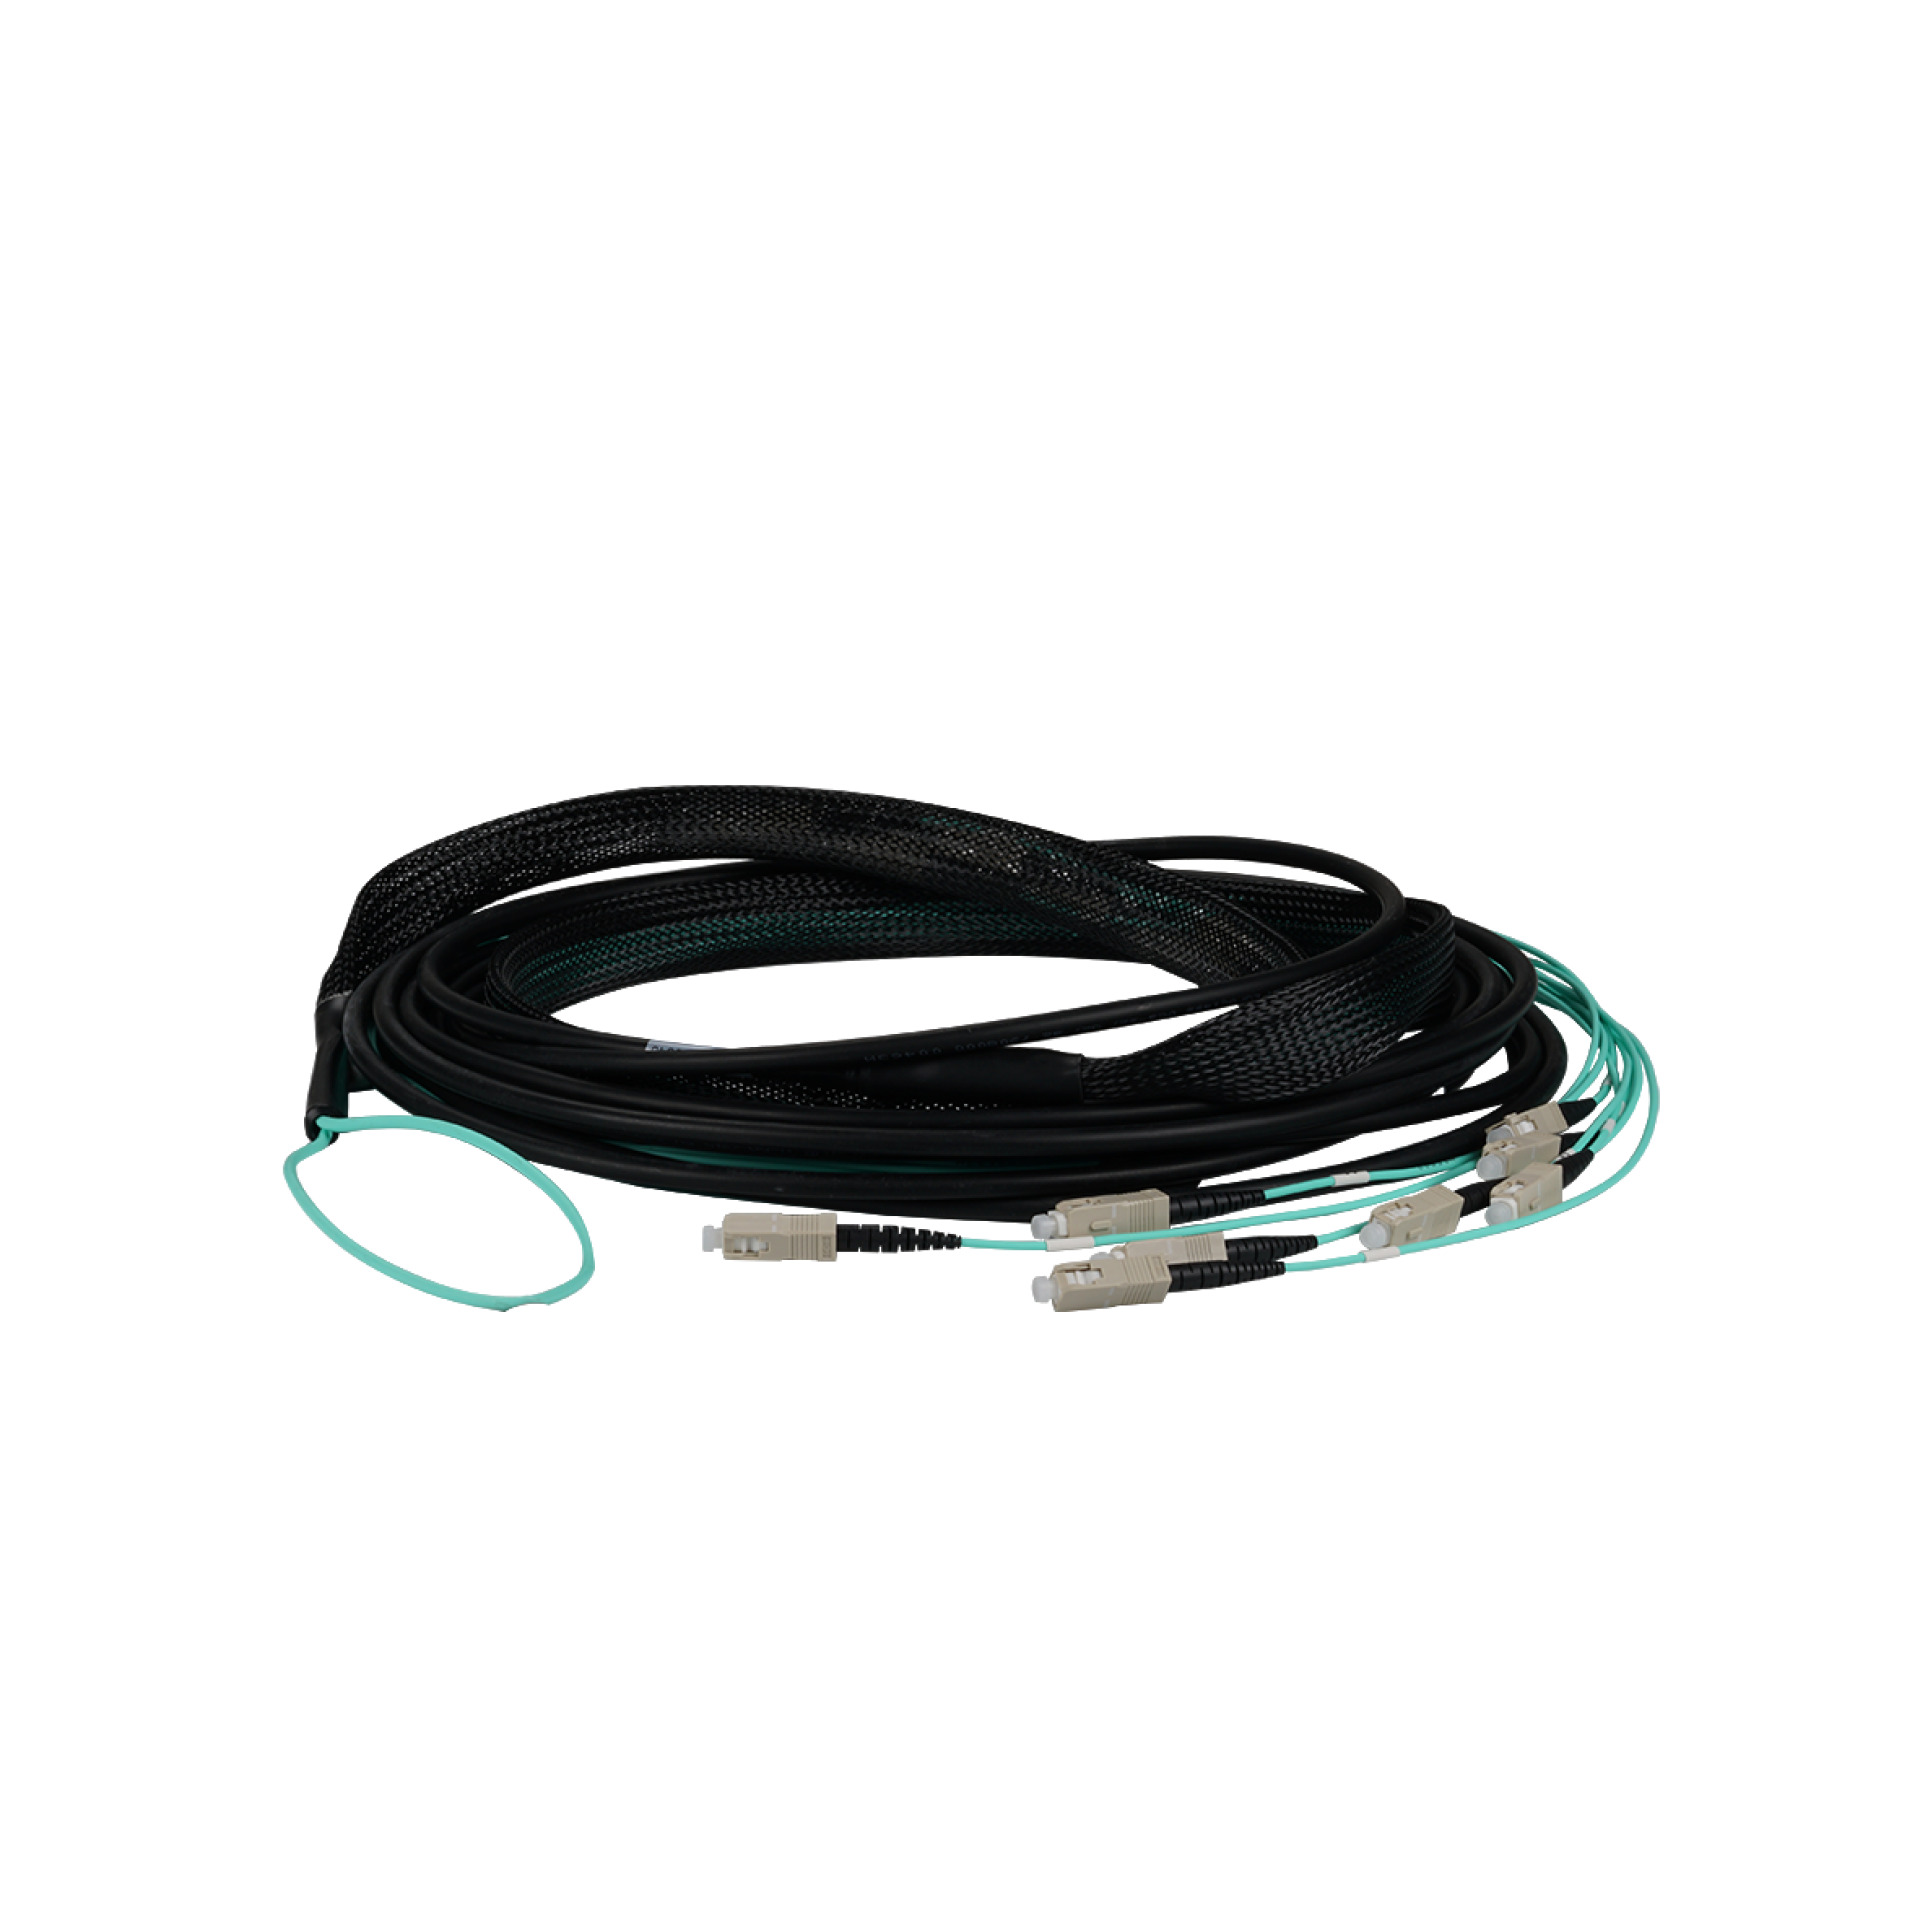 Trunk cable U-DQ(ZN)BH 4G 50/125, SC/SC OM3 40m